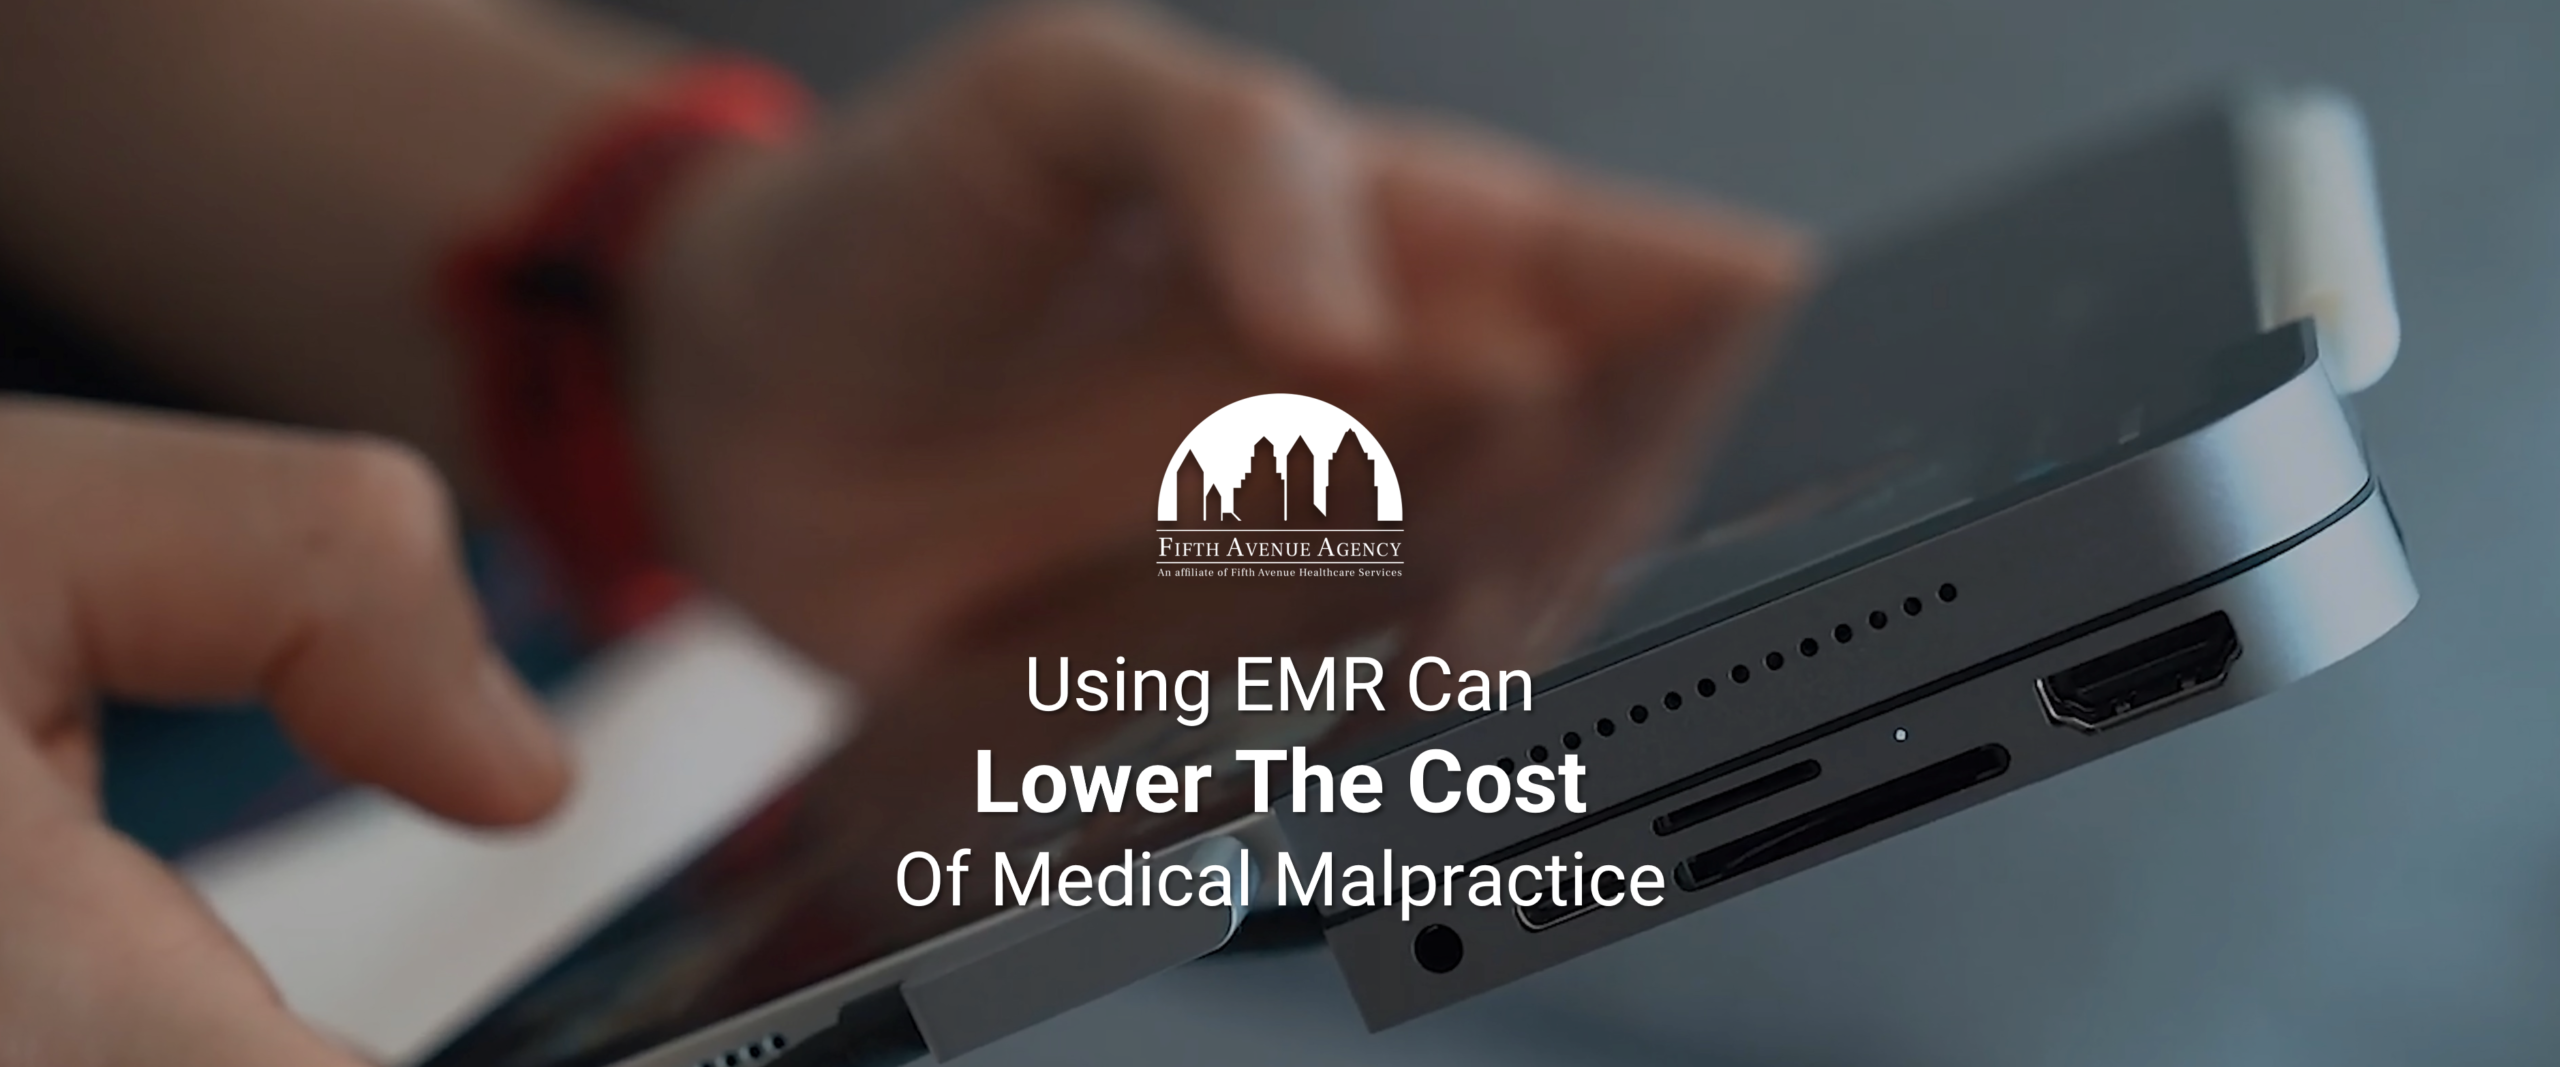 EMR Can Lower The Cost Of Medical Malpractice